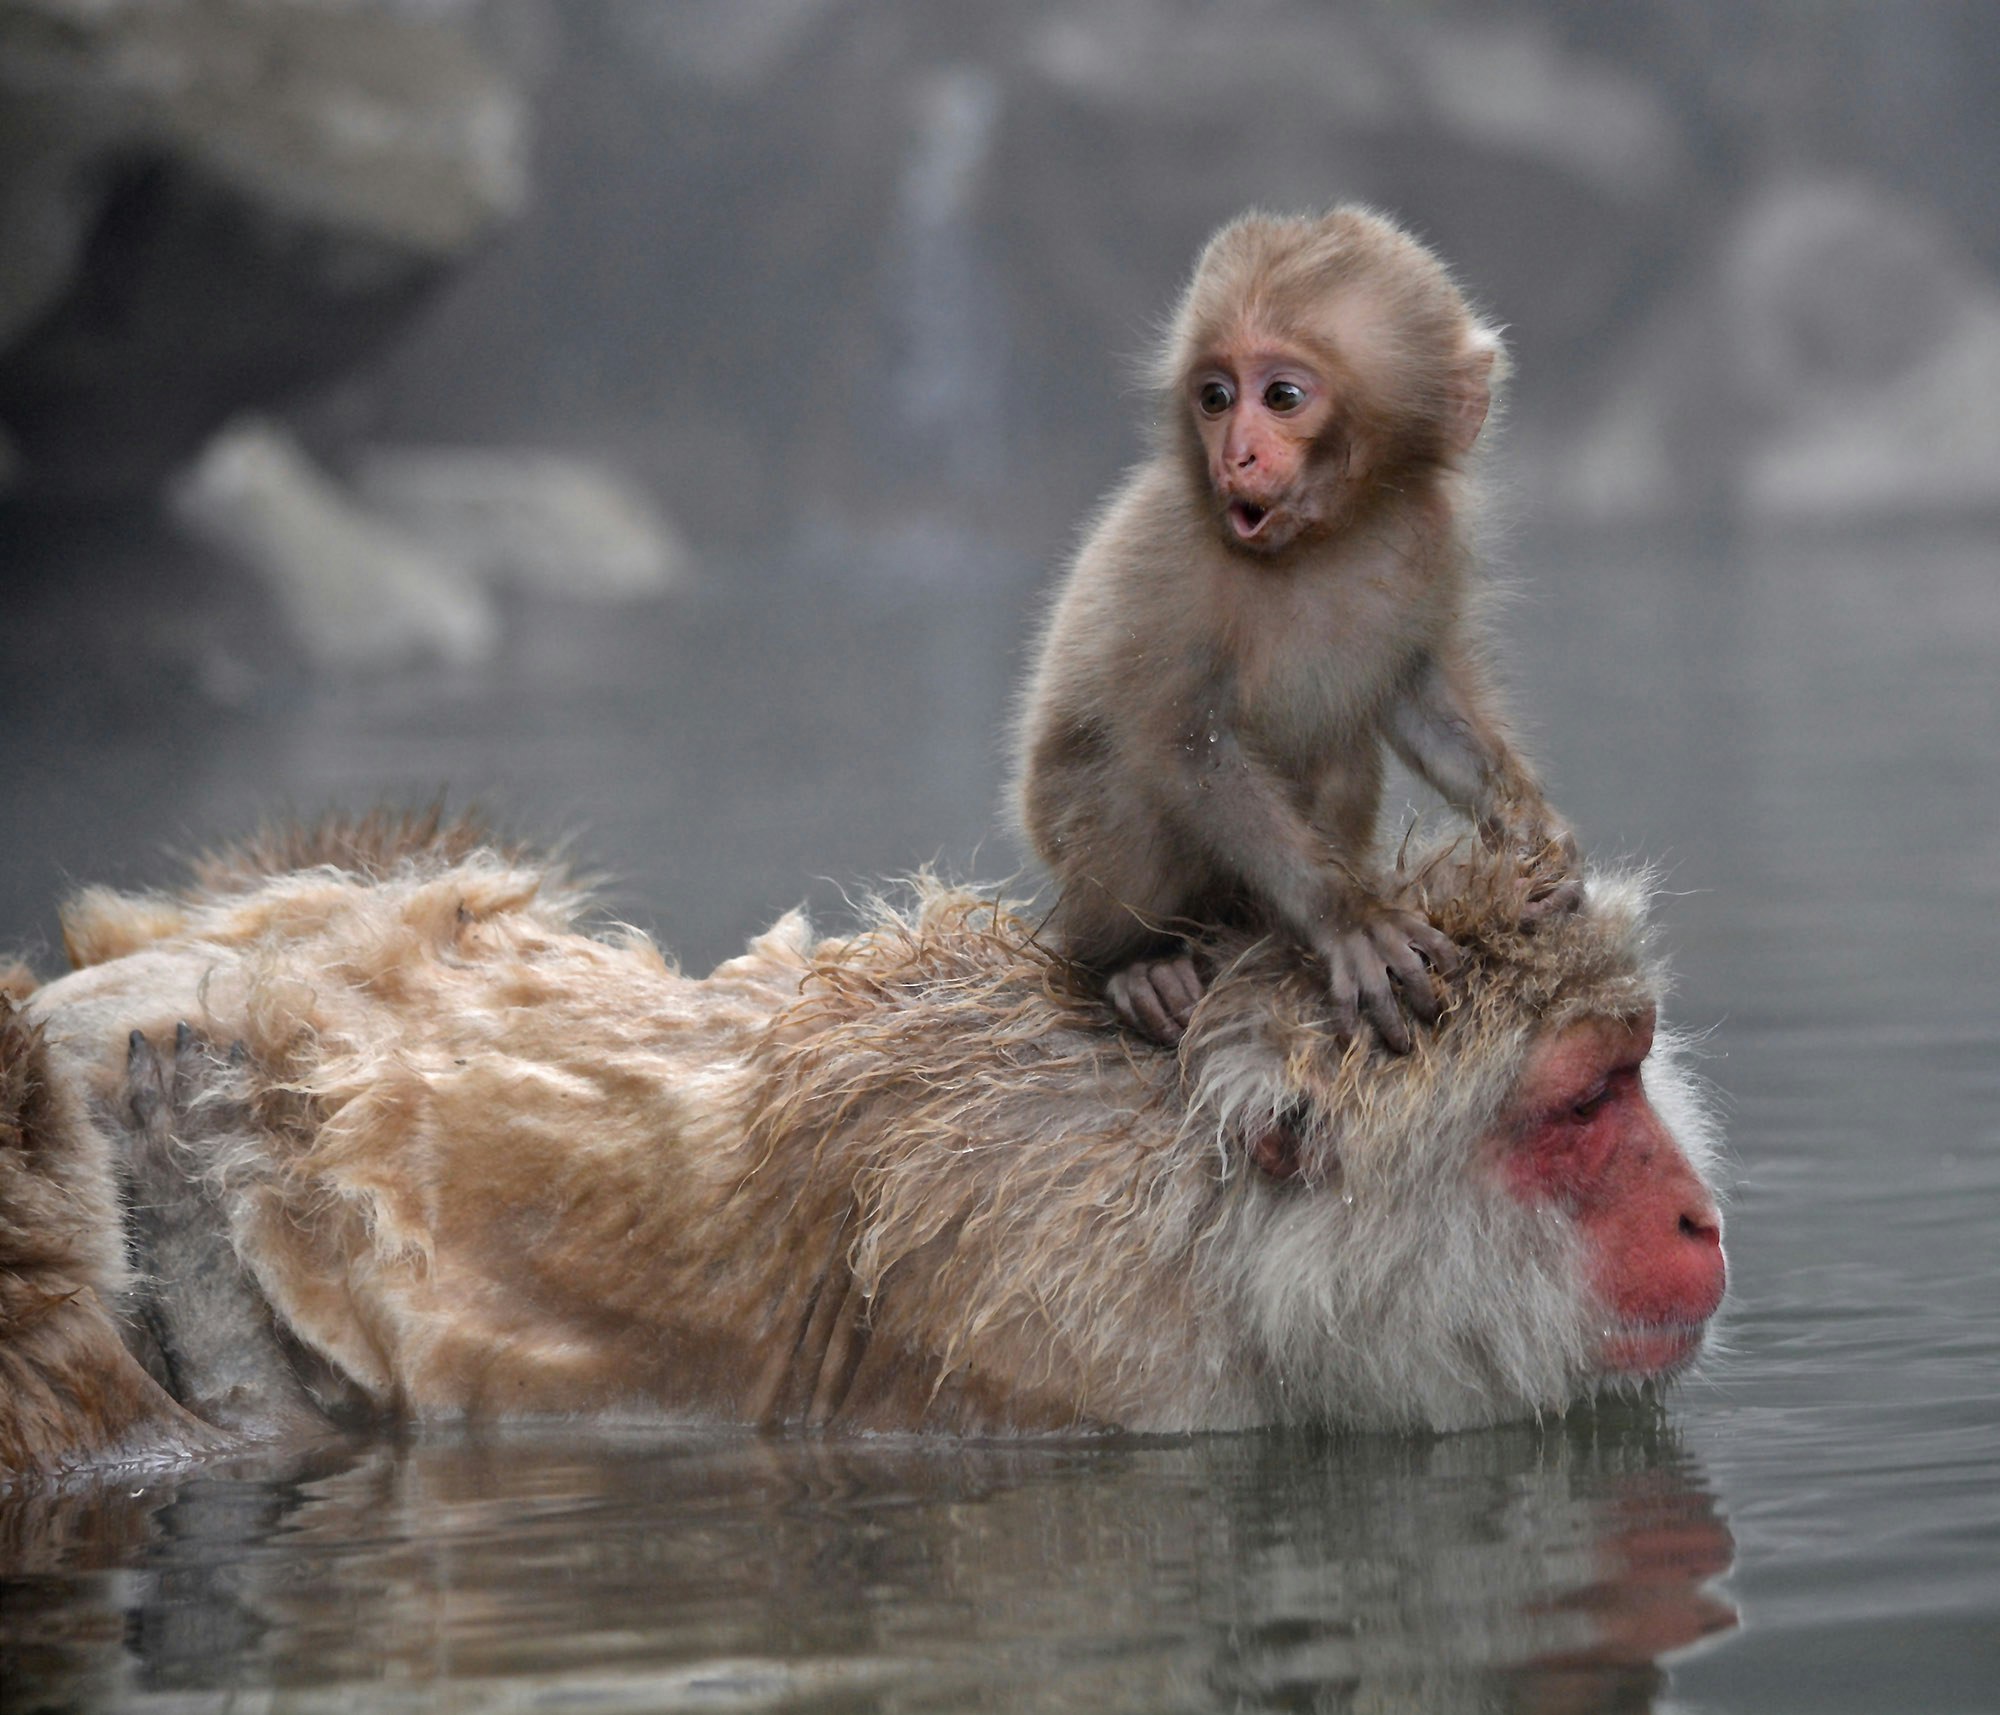 Baby snow monkey and mother bathing